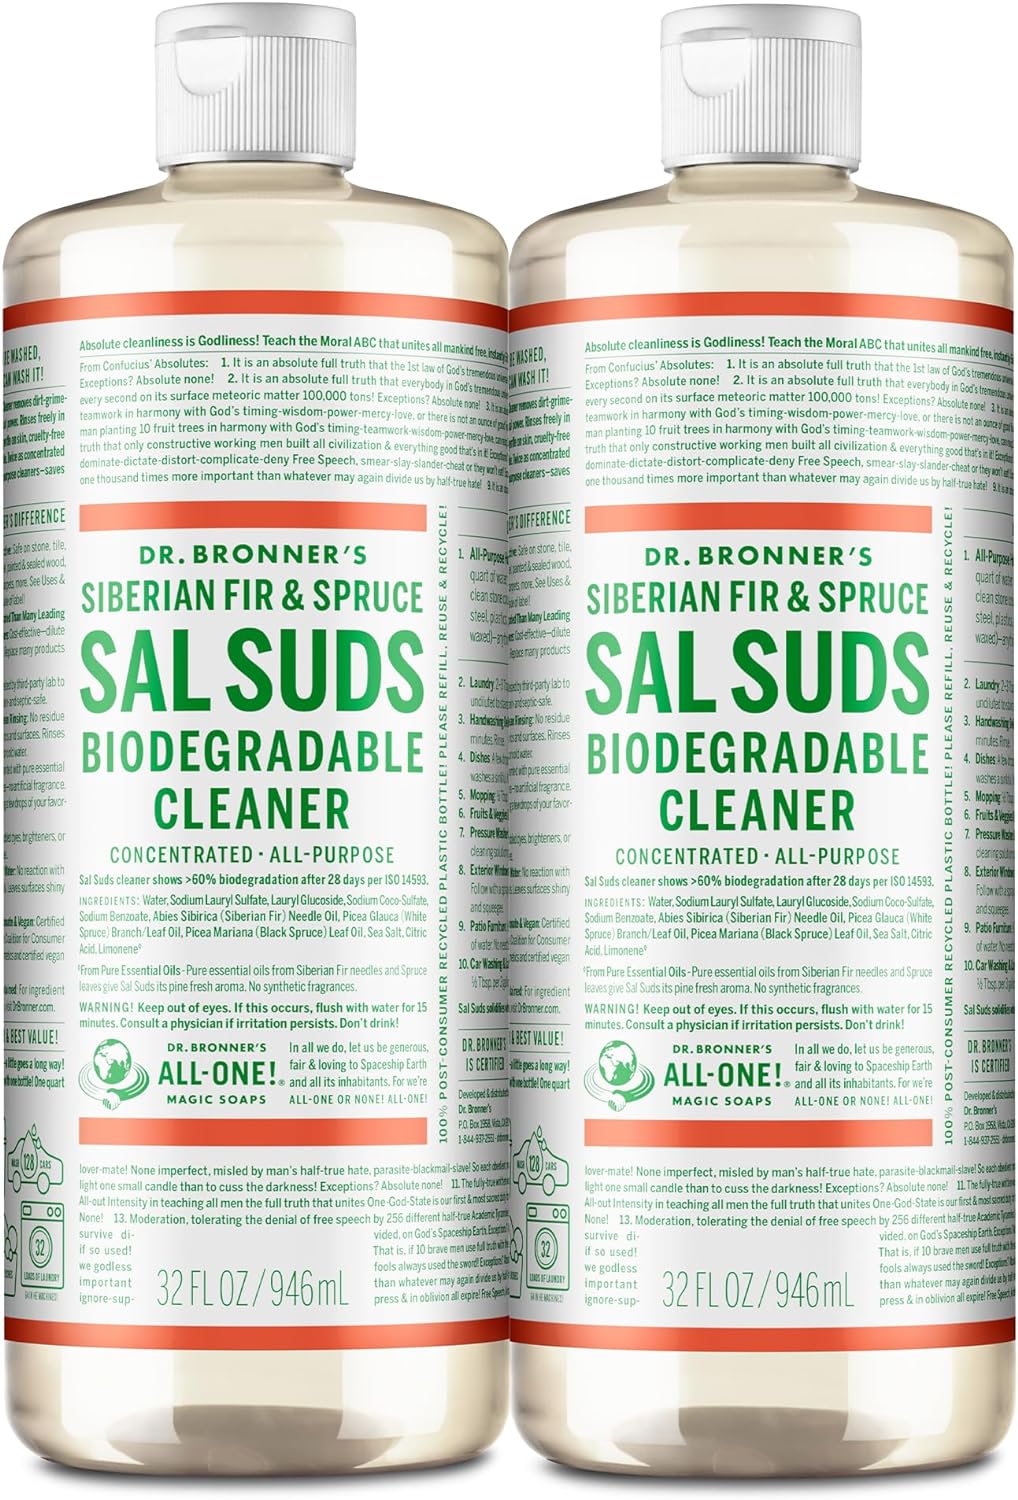 Dr. Bronner's - Sal Suds Biodegradable Cleaner (32 Ounce, 2-Pack) - All-Purpose Cleaner, Pine Cleaner for Floors, Laundry and Dishes, Concentrated, Cuts Grease and Dirt, Powerful Cleaner, Gentle